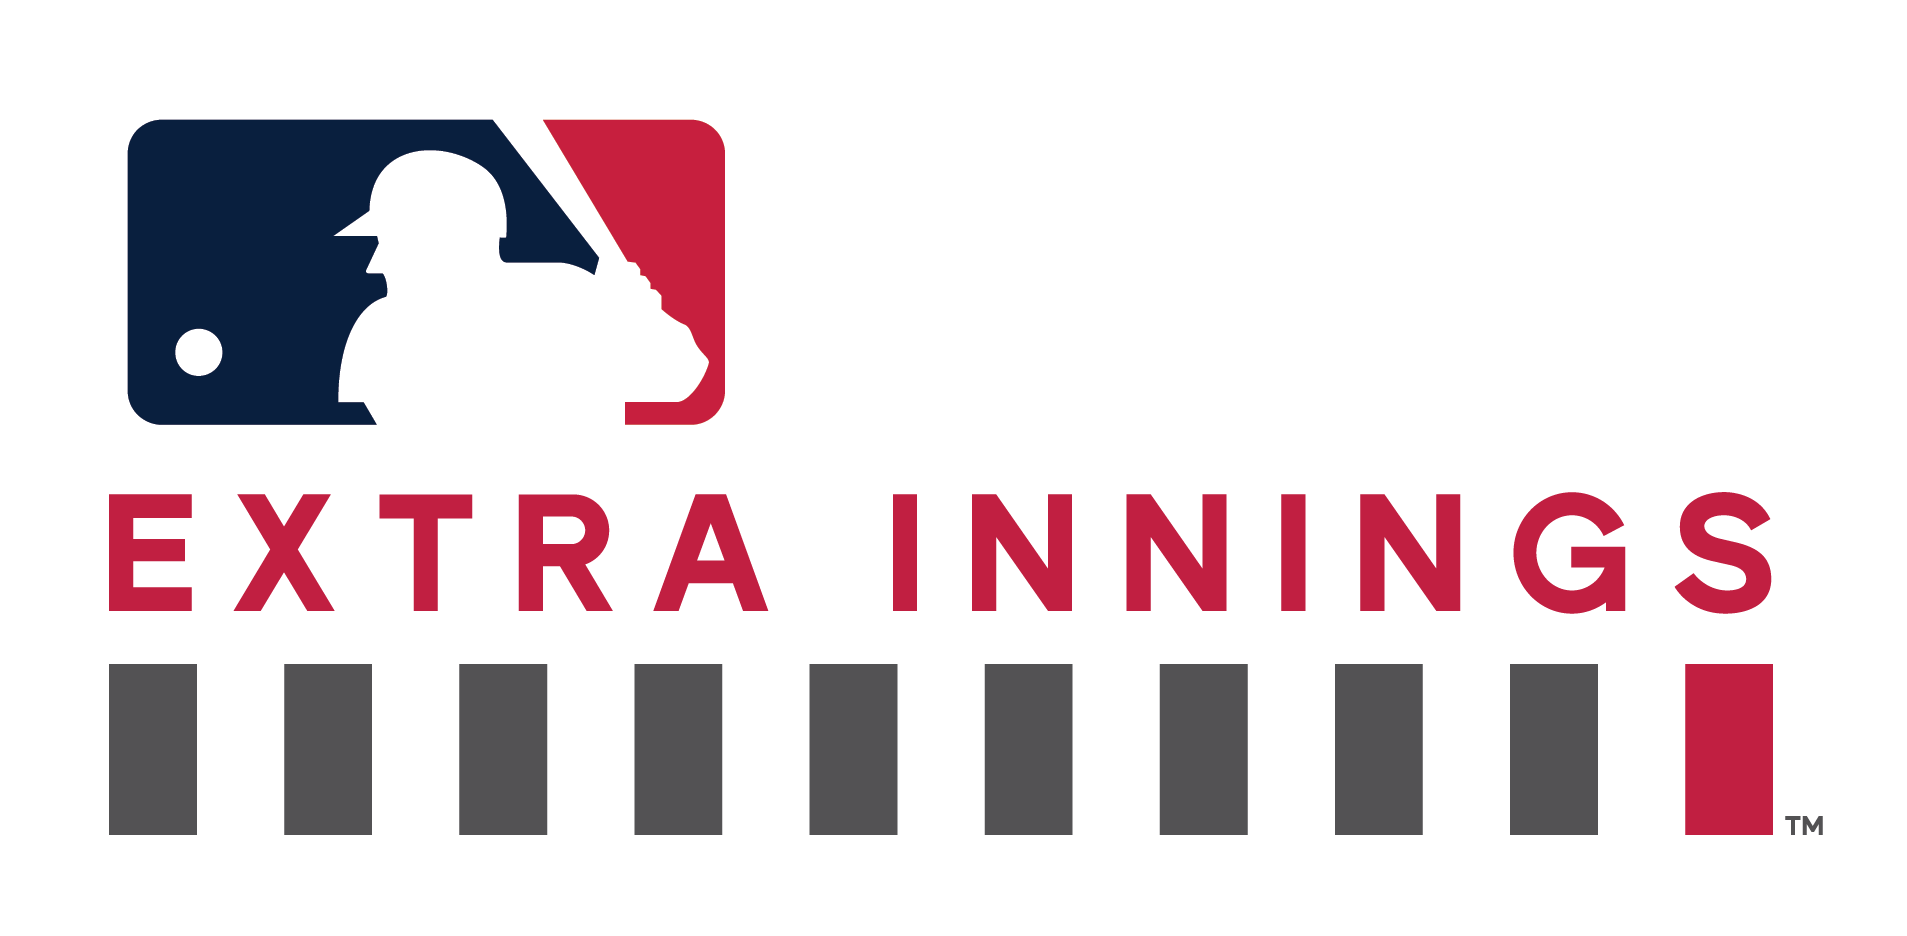 Follow all the action of Major League Baseball with MLB Extra Innings and Spectrum TV